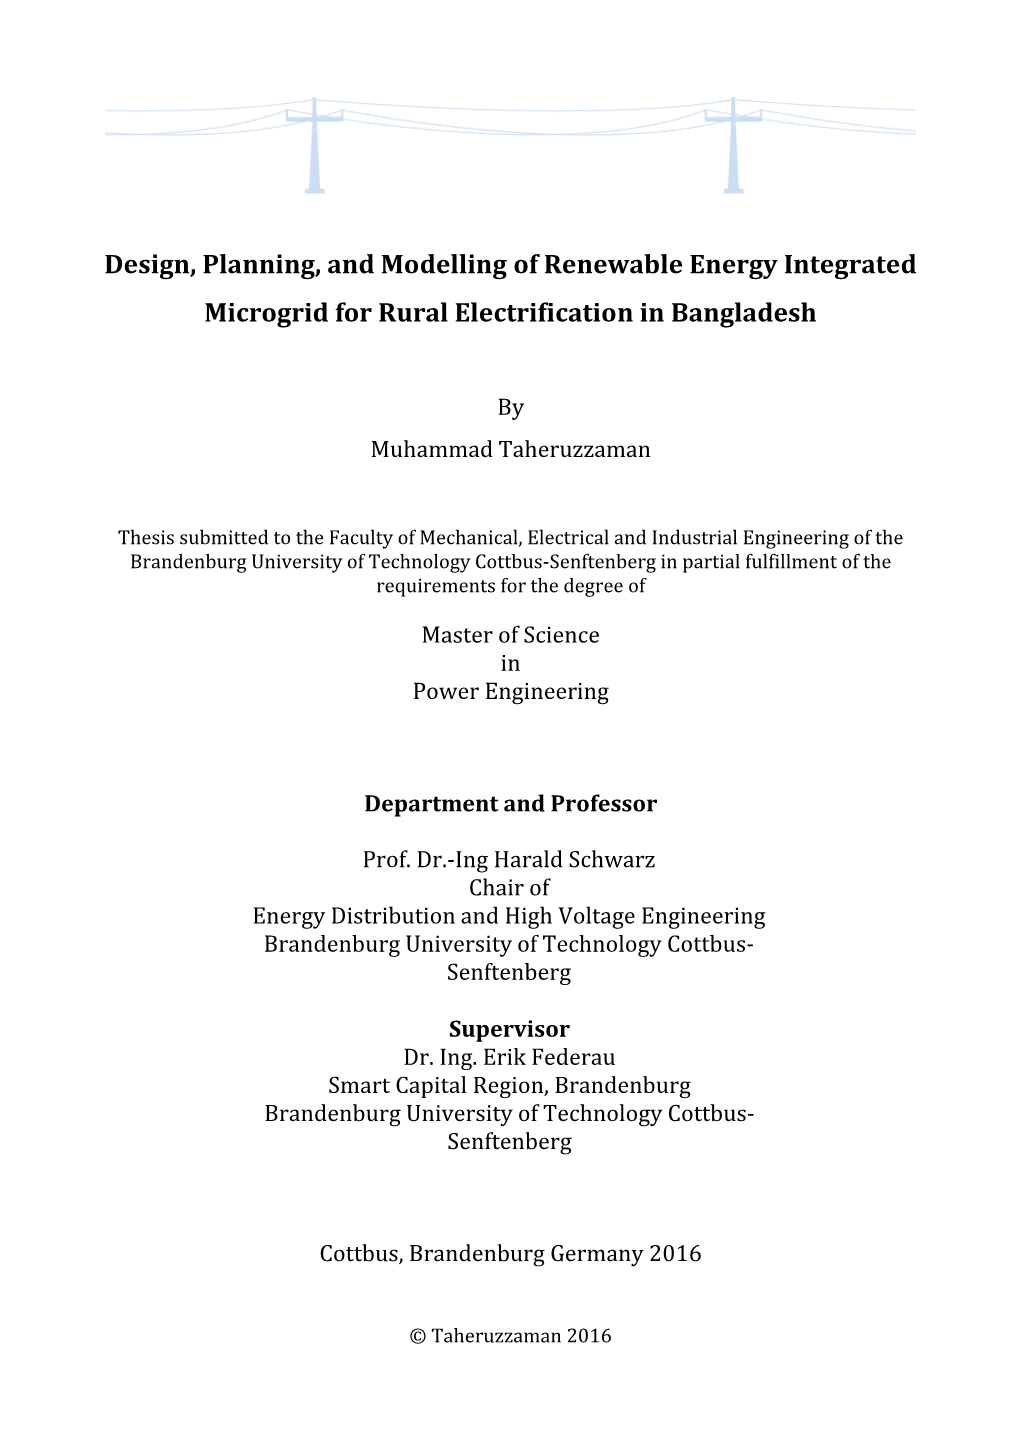 Design, Planning, and Modelling of Renewable Energy Integrated Microgrid for Rural Electrification in Bangladesh